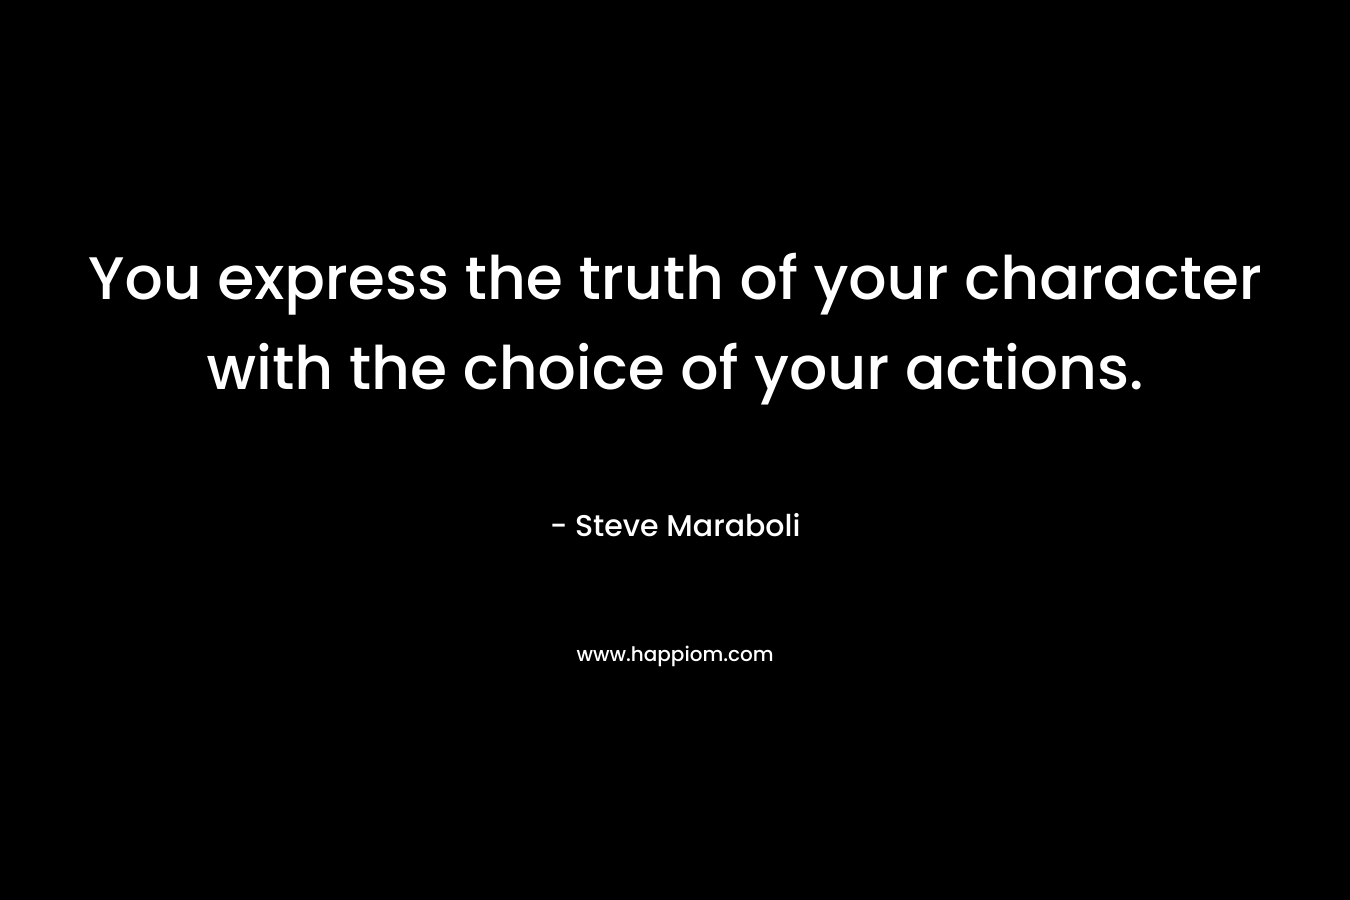 You express the truth of your character with the choice of your actions.